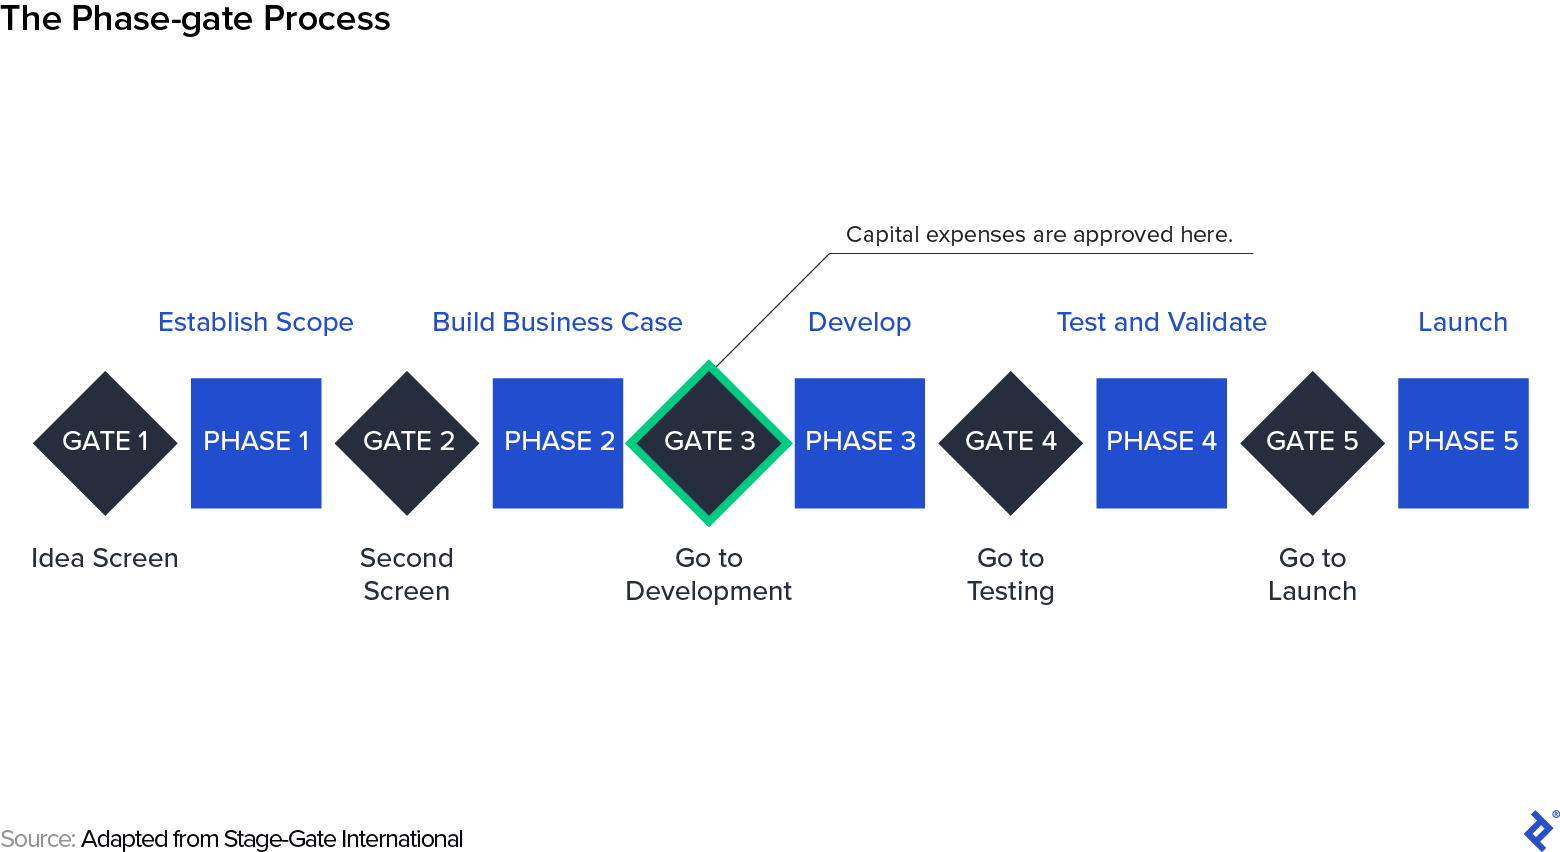 The phase-gate process: Establish Scope, Build Business Case, Develop, Test and Validate, and Launch, and five gates. Gate 3 is for capital expenses.